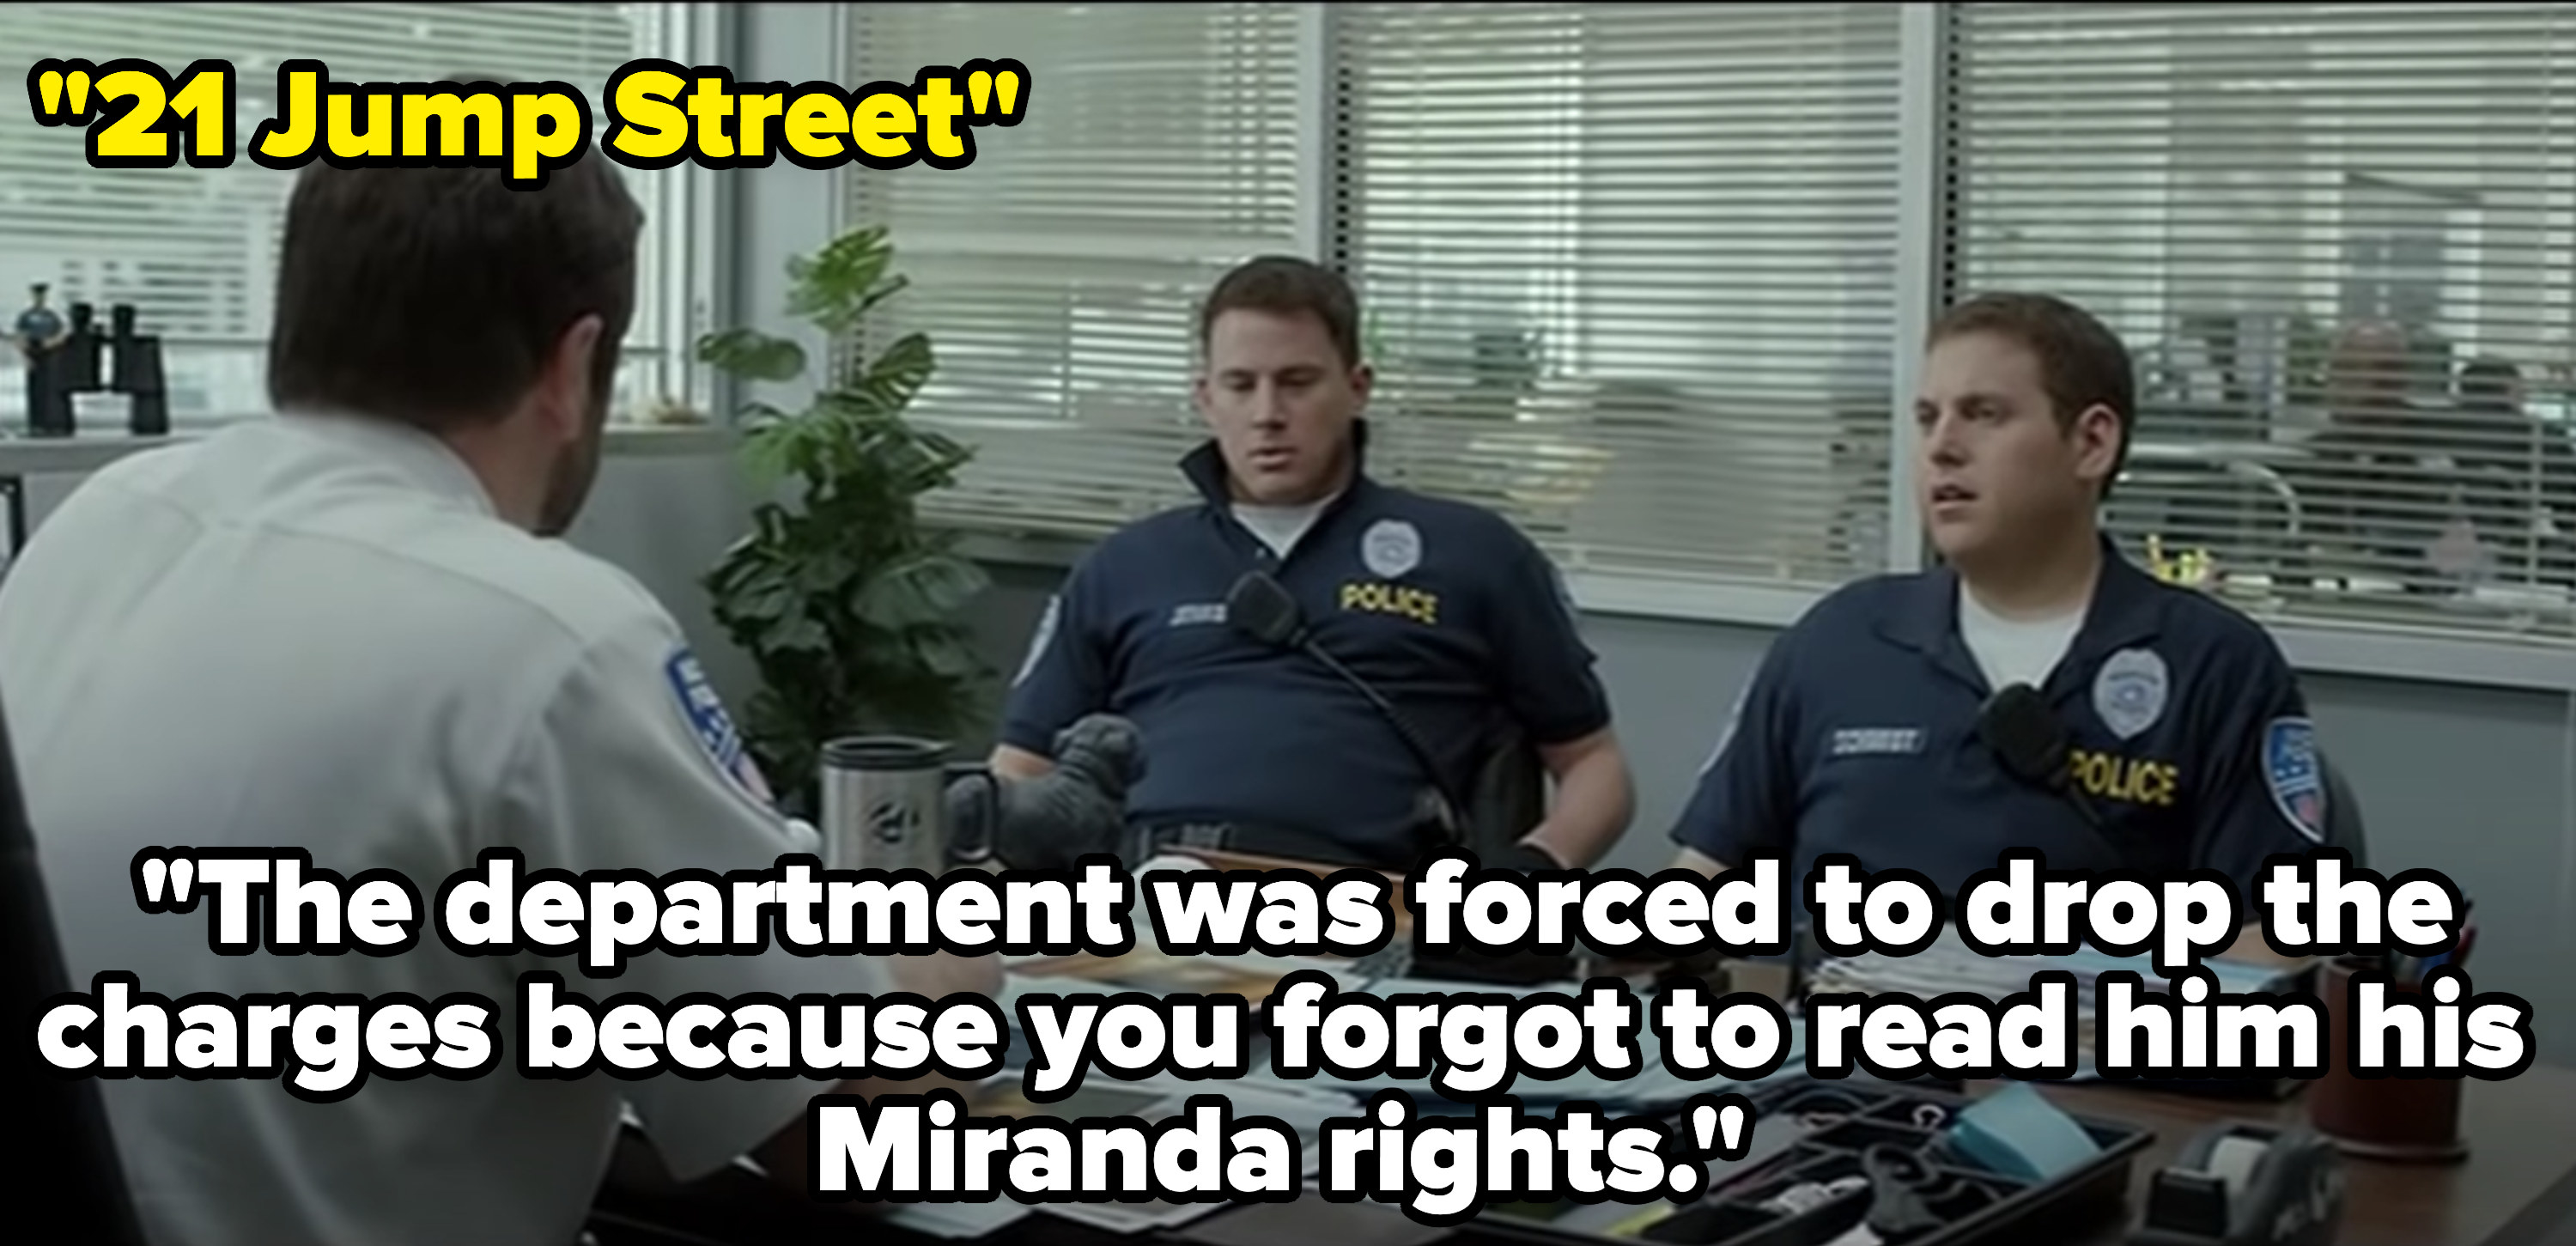 Schmidt and Jenko&#x27;s boss says the department had to drop the charges because Jenko didn&#x27;t read the guy his Miranda rights in 21 Jump Street